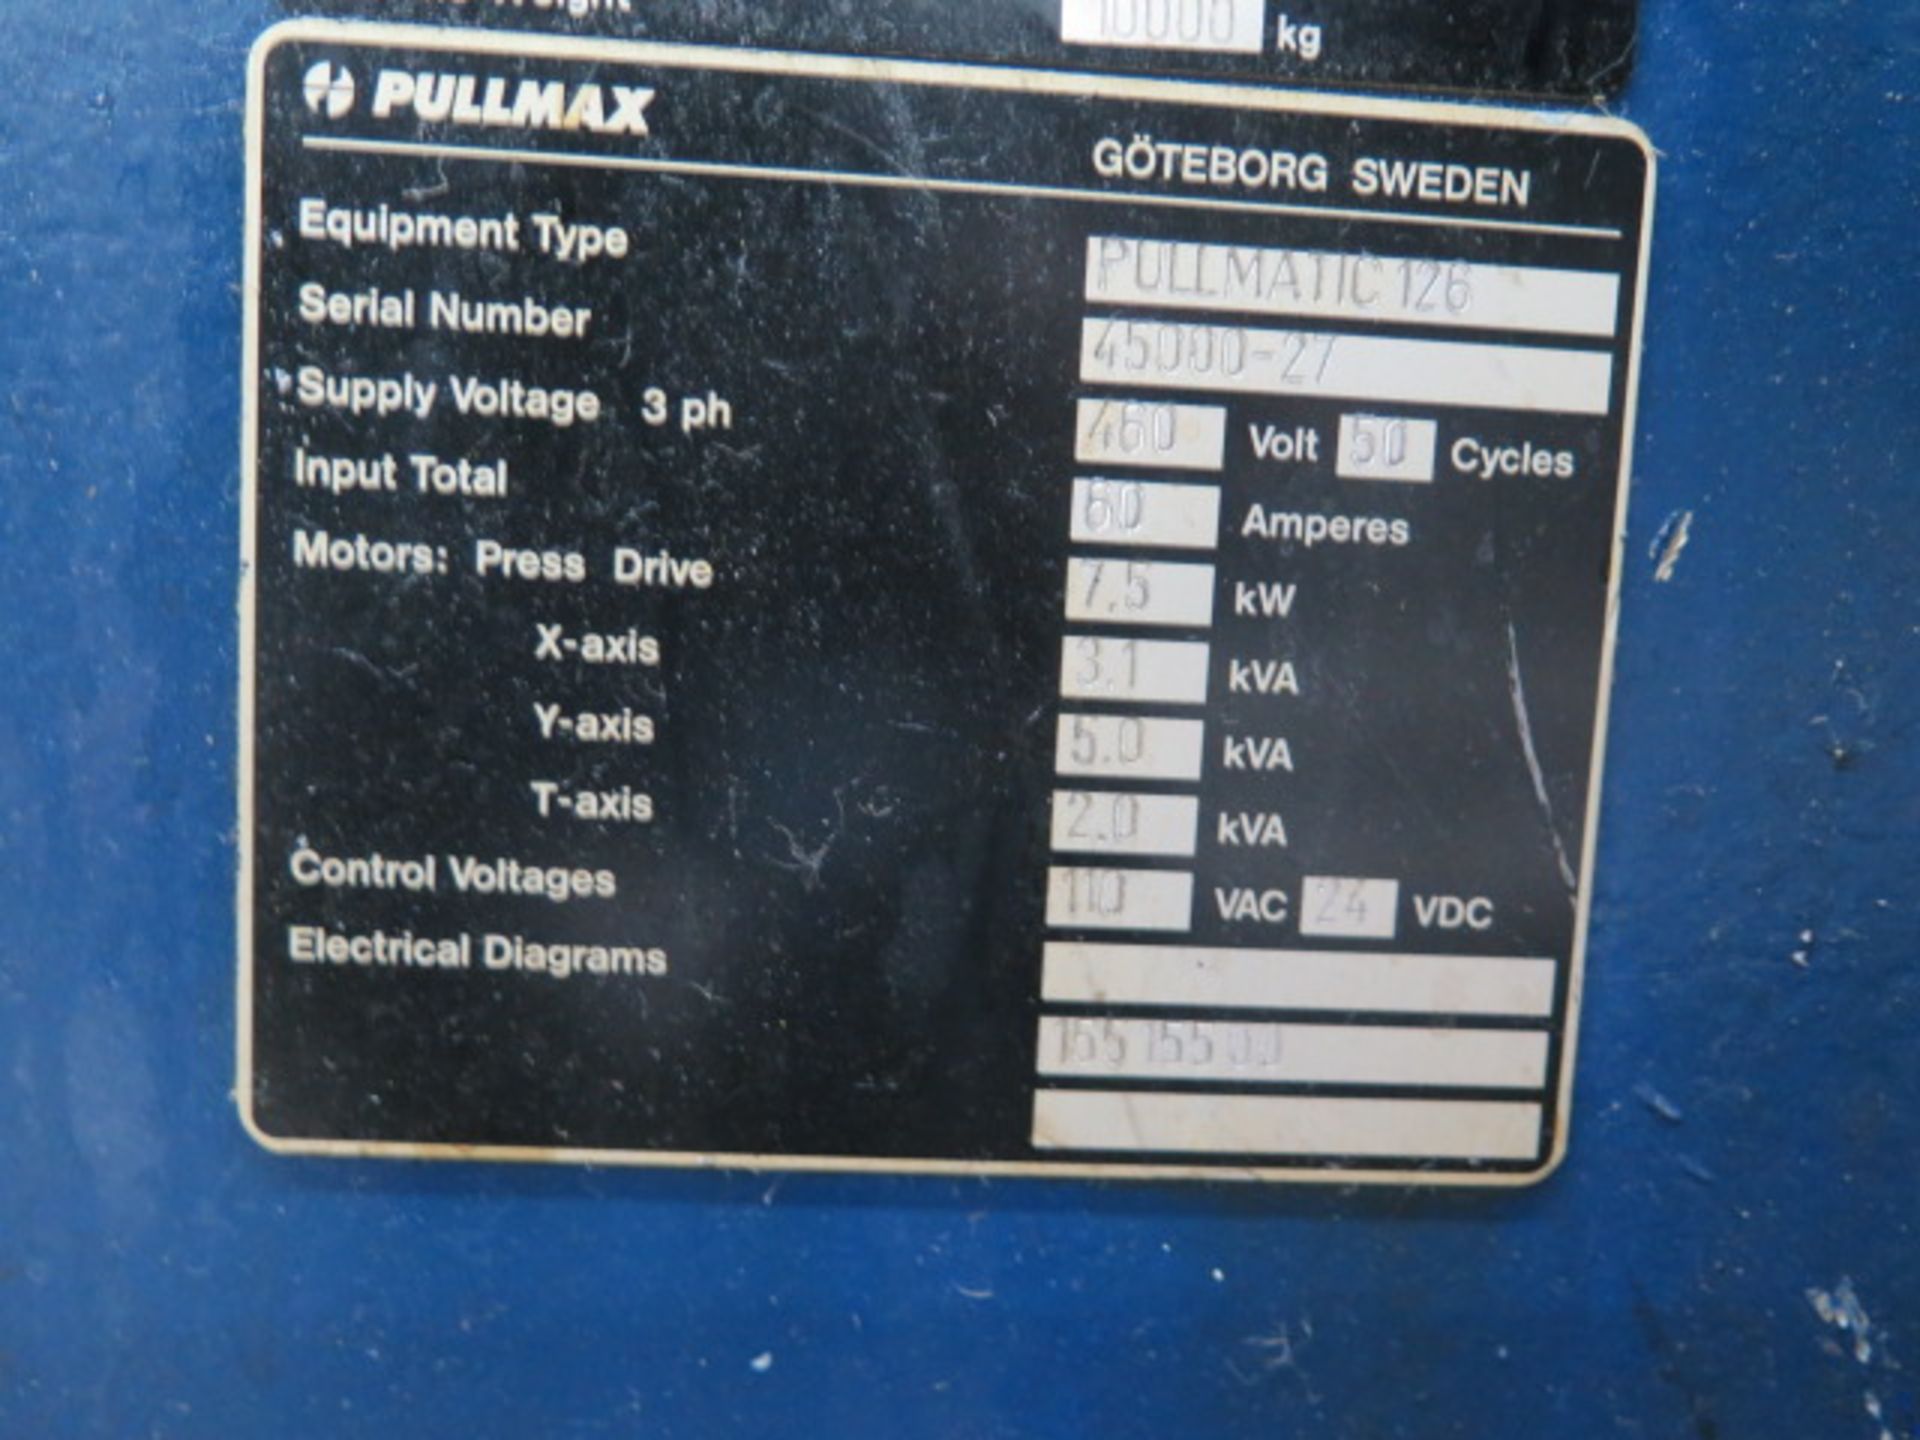 1996 Pullmax Pullmatic 126 33 Ton 15-Station CNC Turret Punch Press s/n 45000027, SOLD AS IS - Image 16 of 16